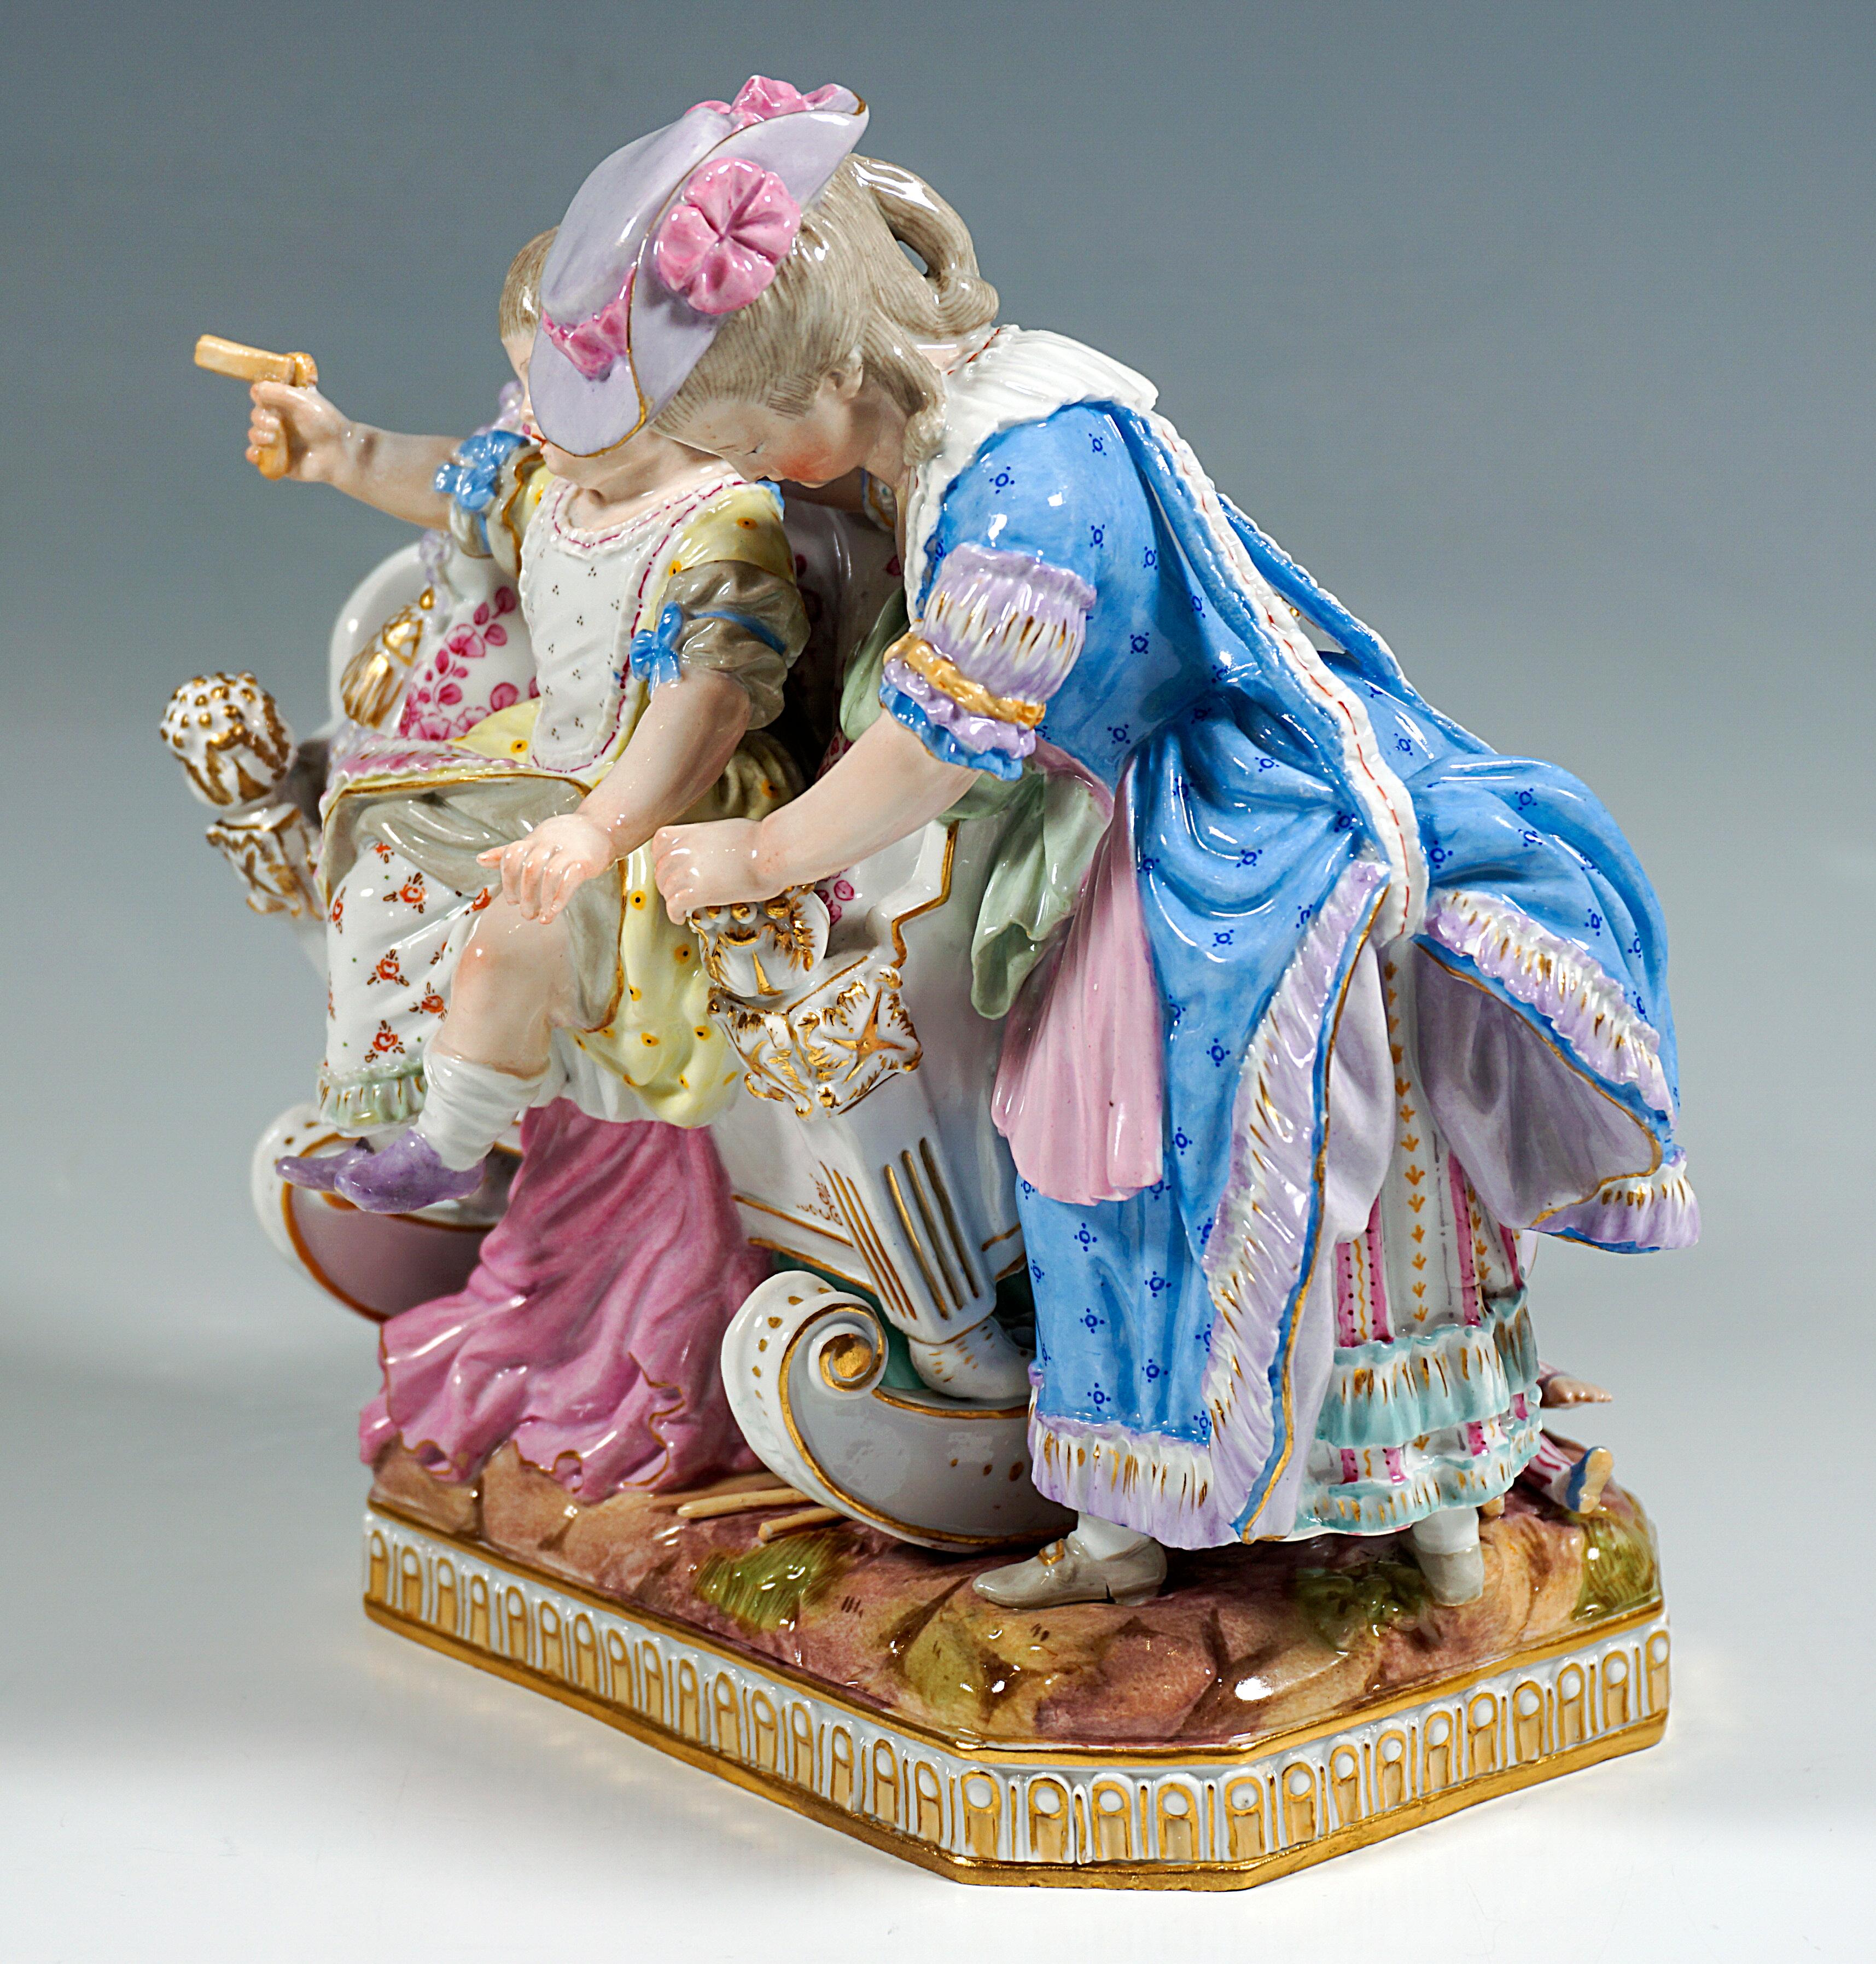 Rococo group of children: The older girl in dress and hat helping her little sibling with ratchet in hand from the cradle to play together, blankets and toys are spread out on the floor.
Very elaborate and loving design of the details.
The group